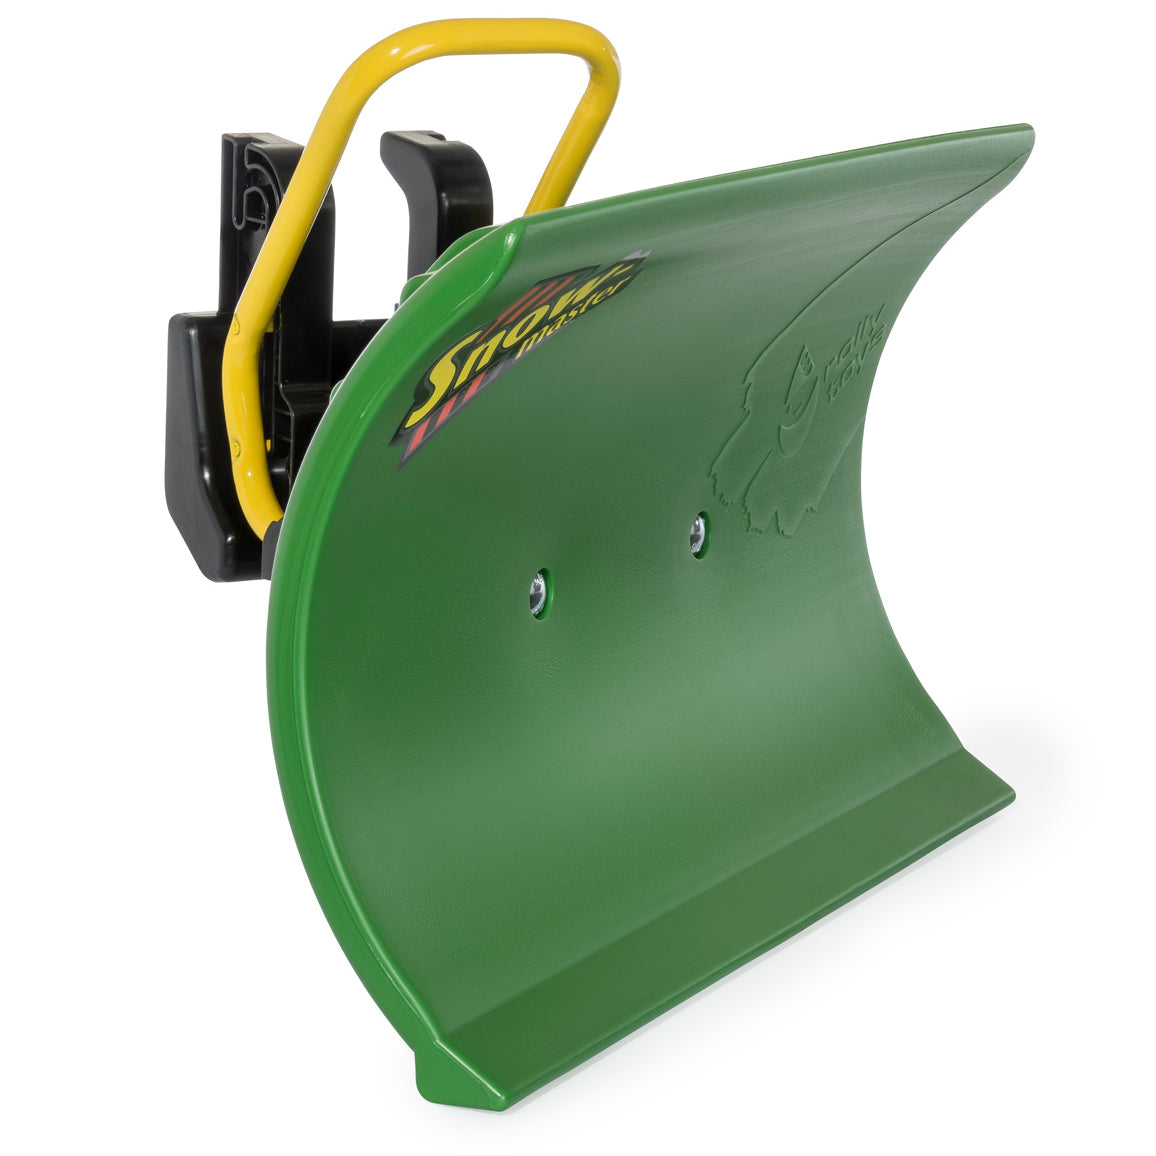 Snow Plow Master Accessory - Green